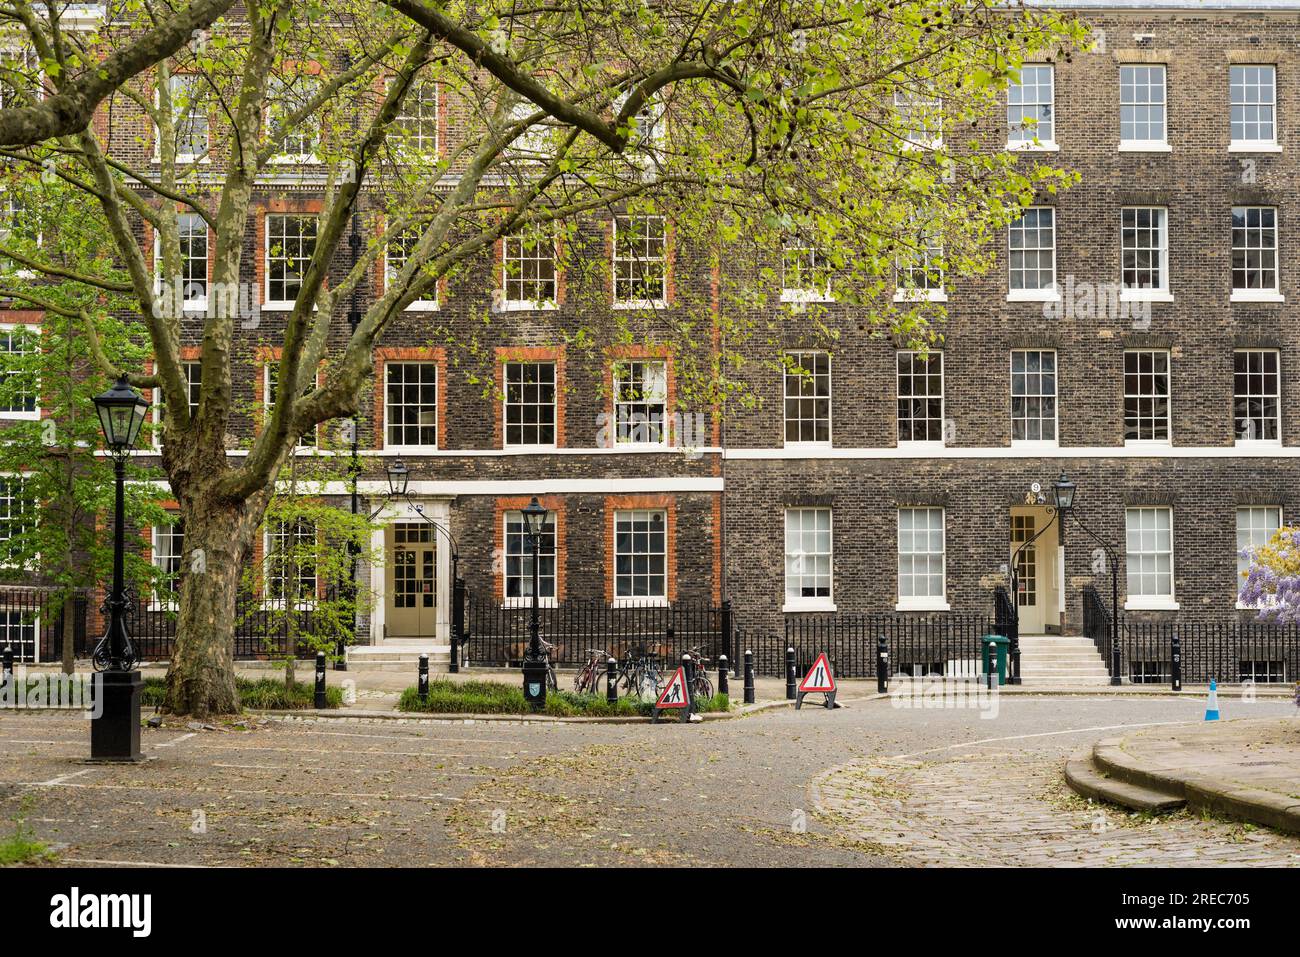 King's Bench Walk, Inner Temple, Barristers' Chambers Building, Londra, Regno Unito Foto Stock